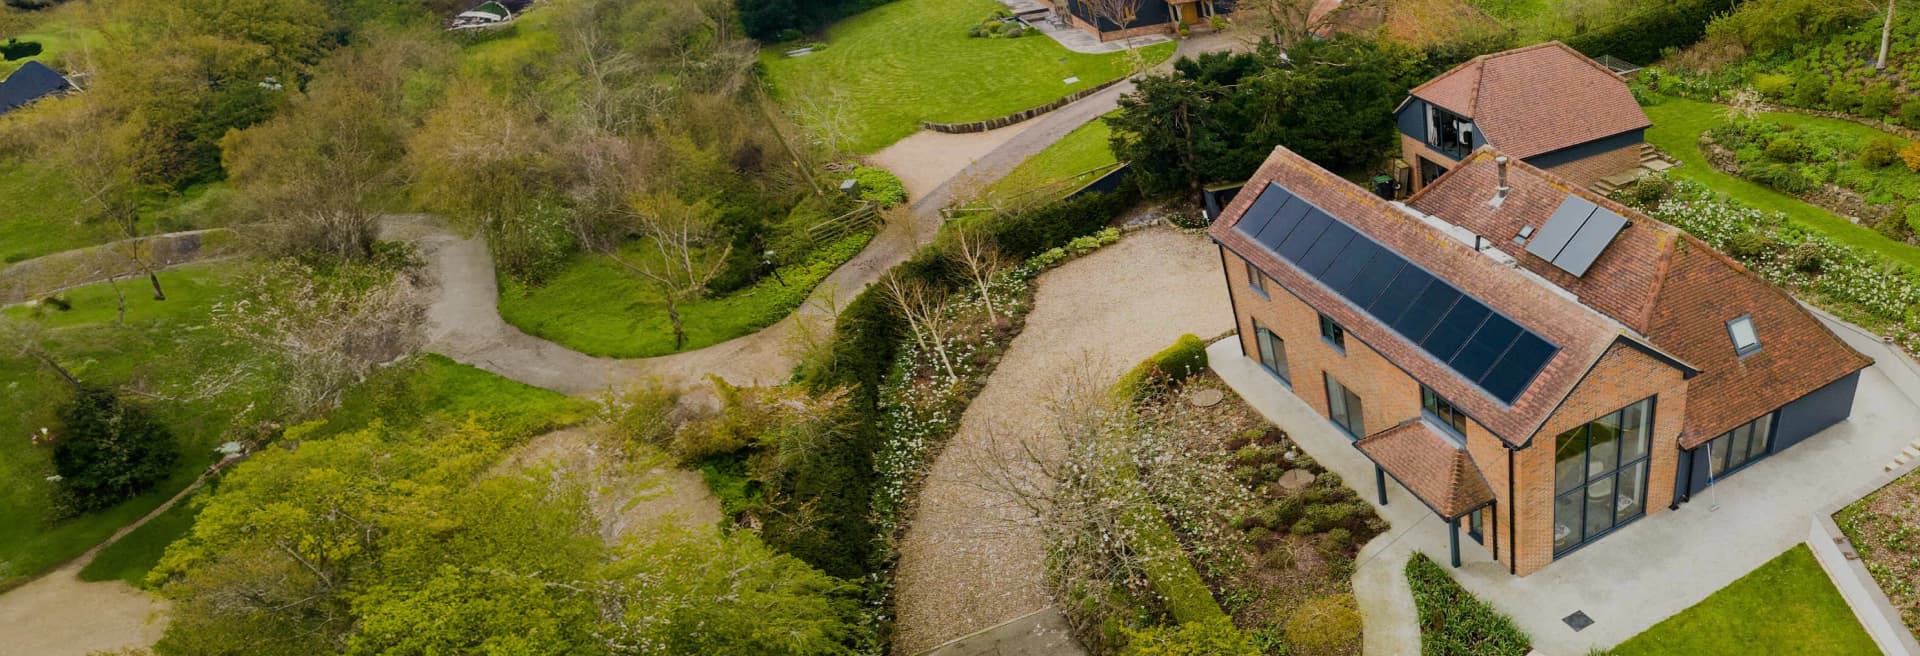 Cahill Renewables | The Benefits of Solar PV Installation: Going Green and Saving Money